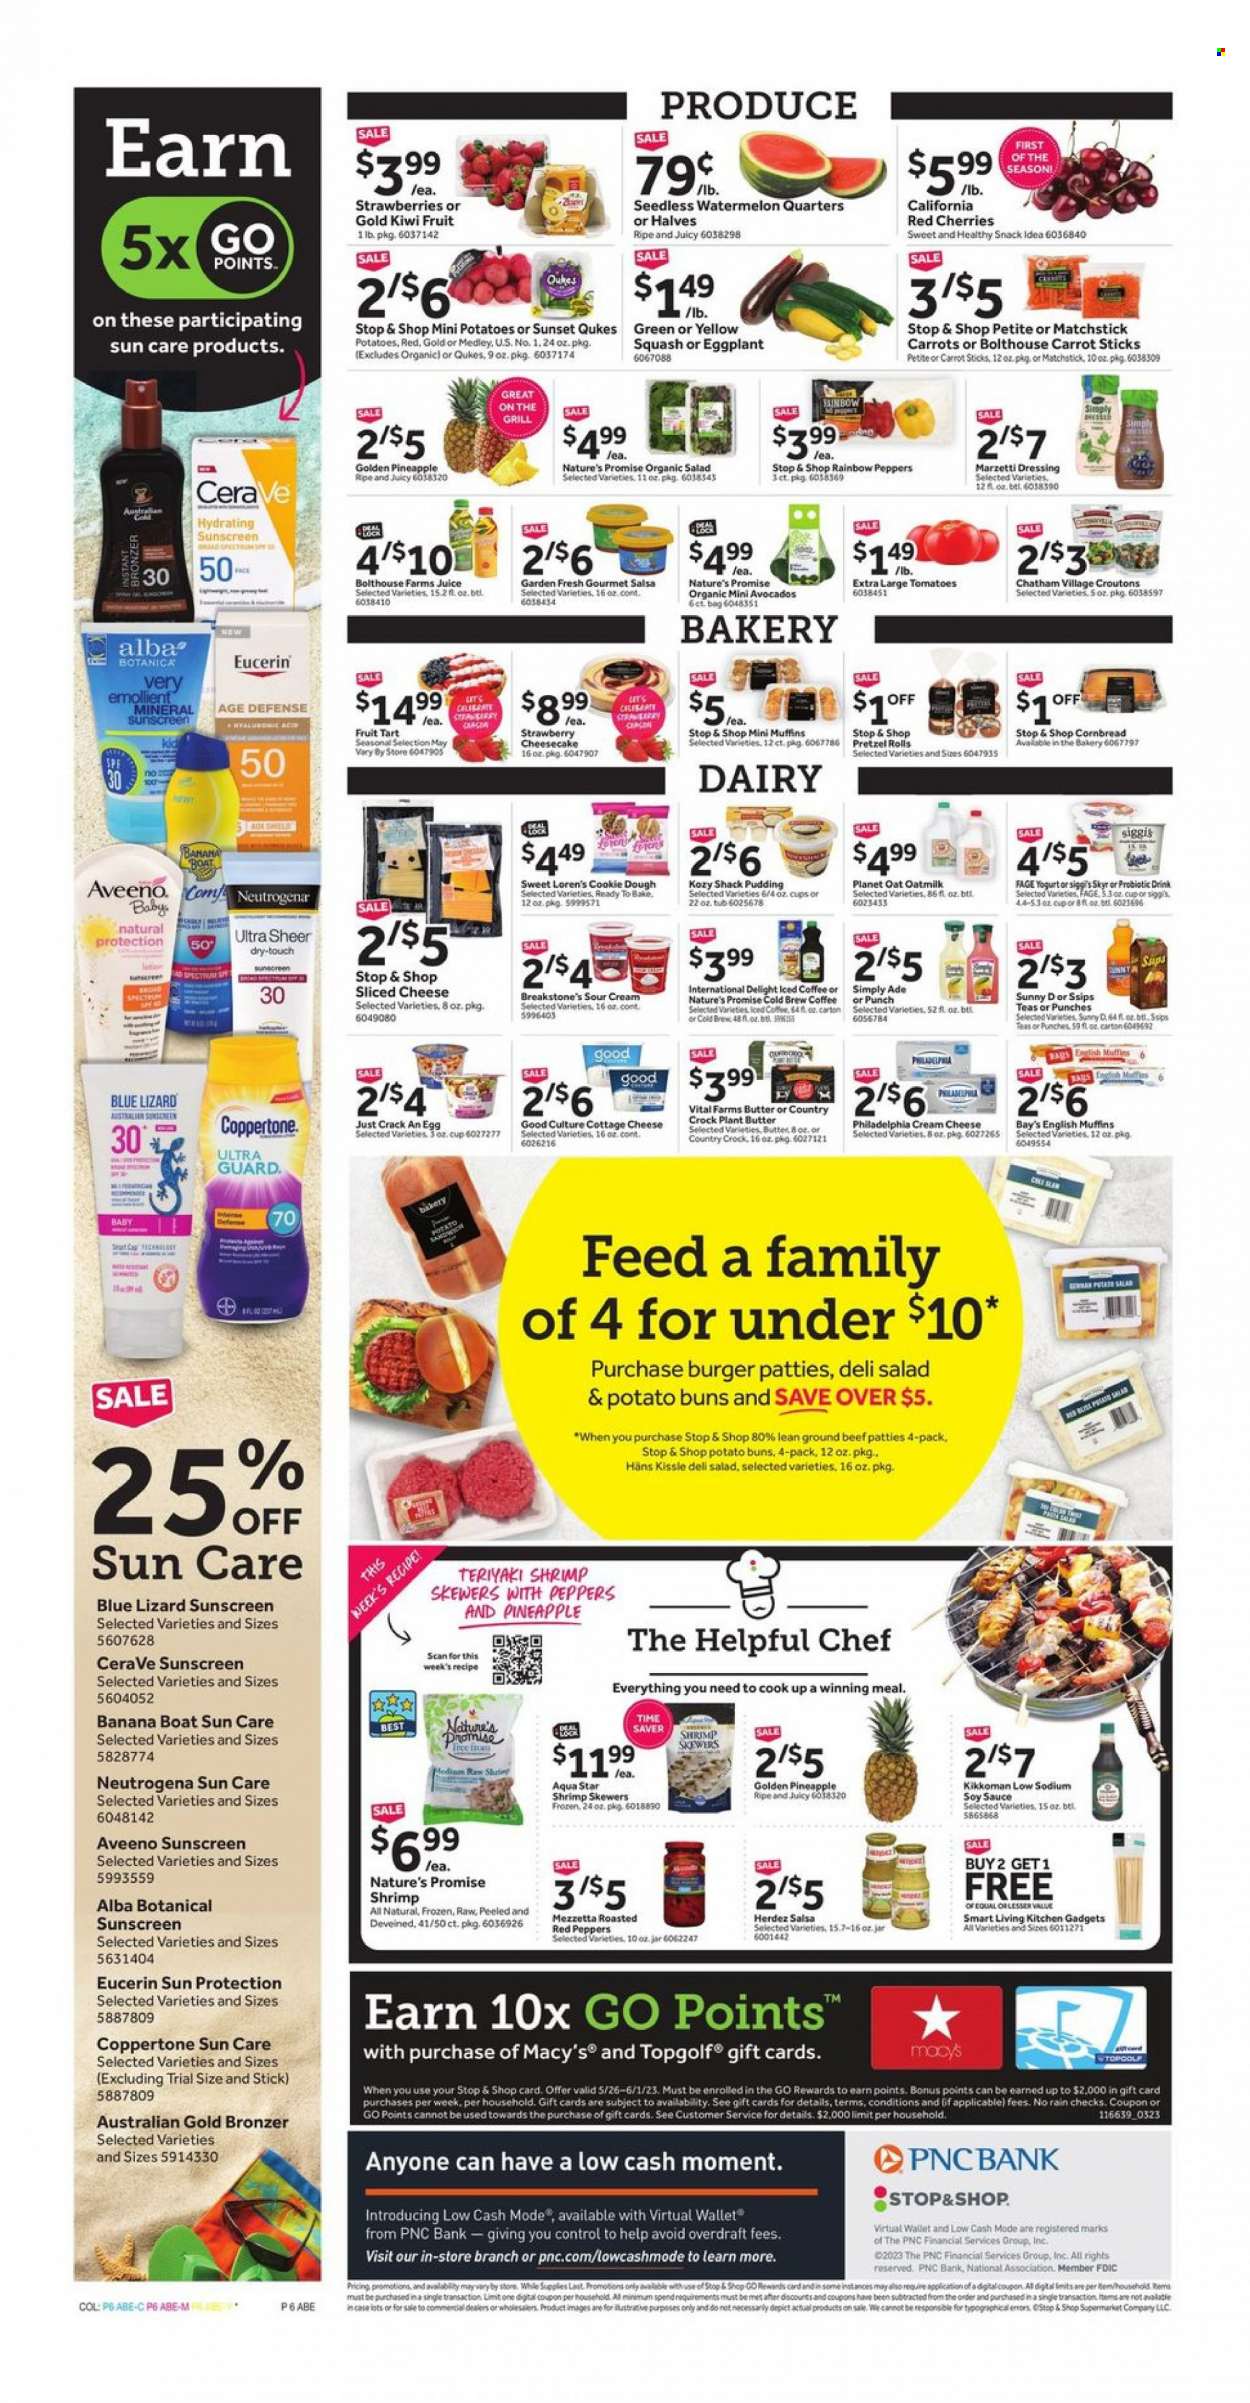 thumbnail - Stop & Shop Flyer - 05/26/2023 - 06/01/2023 - Sales products - brownies, muffin, corn, ginger, tomatoes, onion, chicken, pasta sauce, Quaker, Alfredo sauce, Kraft®, Hormel, ready meal, milk, Miracle Whip, crackers, Kellogg's, Pop-Tarts, fruit snack, RITZ, Nabisco, Gerber, tortilla chips, potato chips, chips, Thins, Chex Mix, frosting, canned tomatoes, tomato sauce, Heinz, canned vegetables, cereals, Rice Krispies, Nature Valley, Fiber One, BBQ sauce, salad dressing, ketchup, dressing, salsa, Classico, cooking spray, olive oil, oil, syrup, Canada Dry, Pepsi, juice, Lipton, soft drink, 7UP, Snapple, Country Time, seltzer water, Smartwater, water, coffee, coffee capsules, K-Cups, Lavazza, wipes, Pampers, napkins, bath tissue, Quilted Northern, kitchen towels, paper towels, detergent, Febreze, Gain, Scrubbing Bubbles, cleaner, bathroom cleaner, Cascade, Tide, fabric softener, liquid detergent, Downy Laundry, Old Spice, Crest, Tampax, sanitary pads, Always Discreet, Poise, Herbal Essences, Gillette, Venus, Ziploc, storage bag, Dixie, Nature Made, vitamin D3, dietary supplement. Page 6.